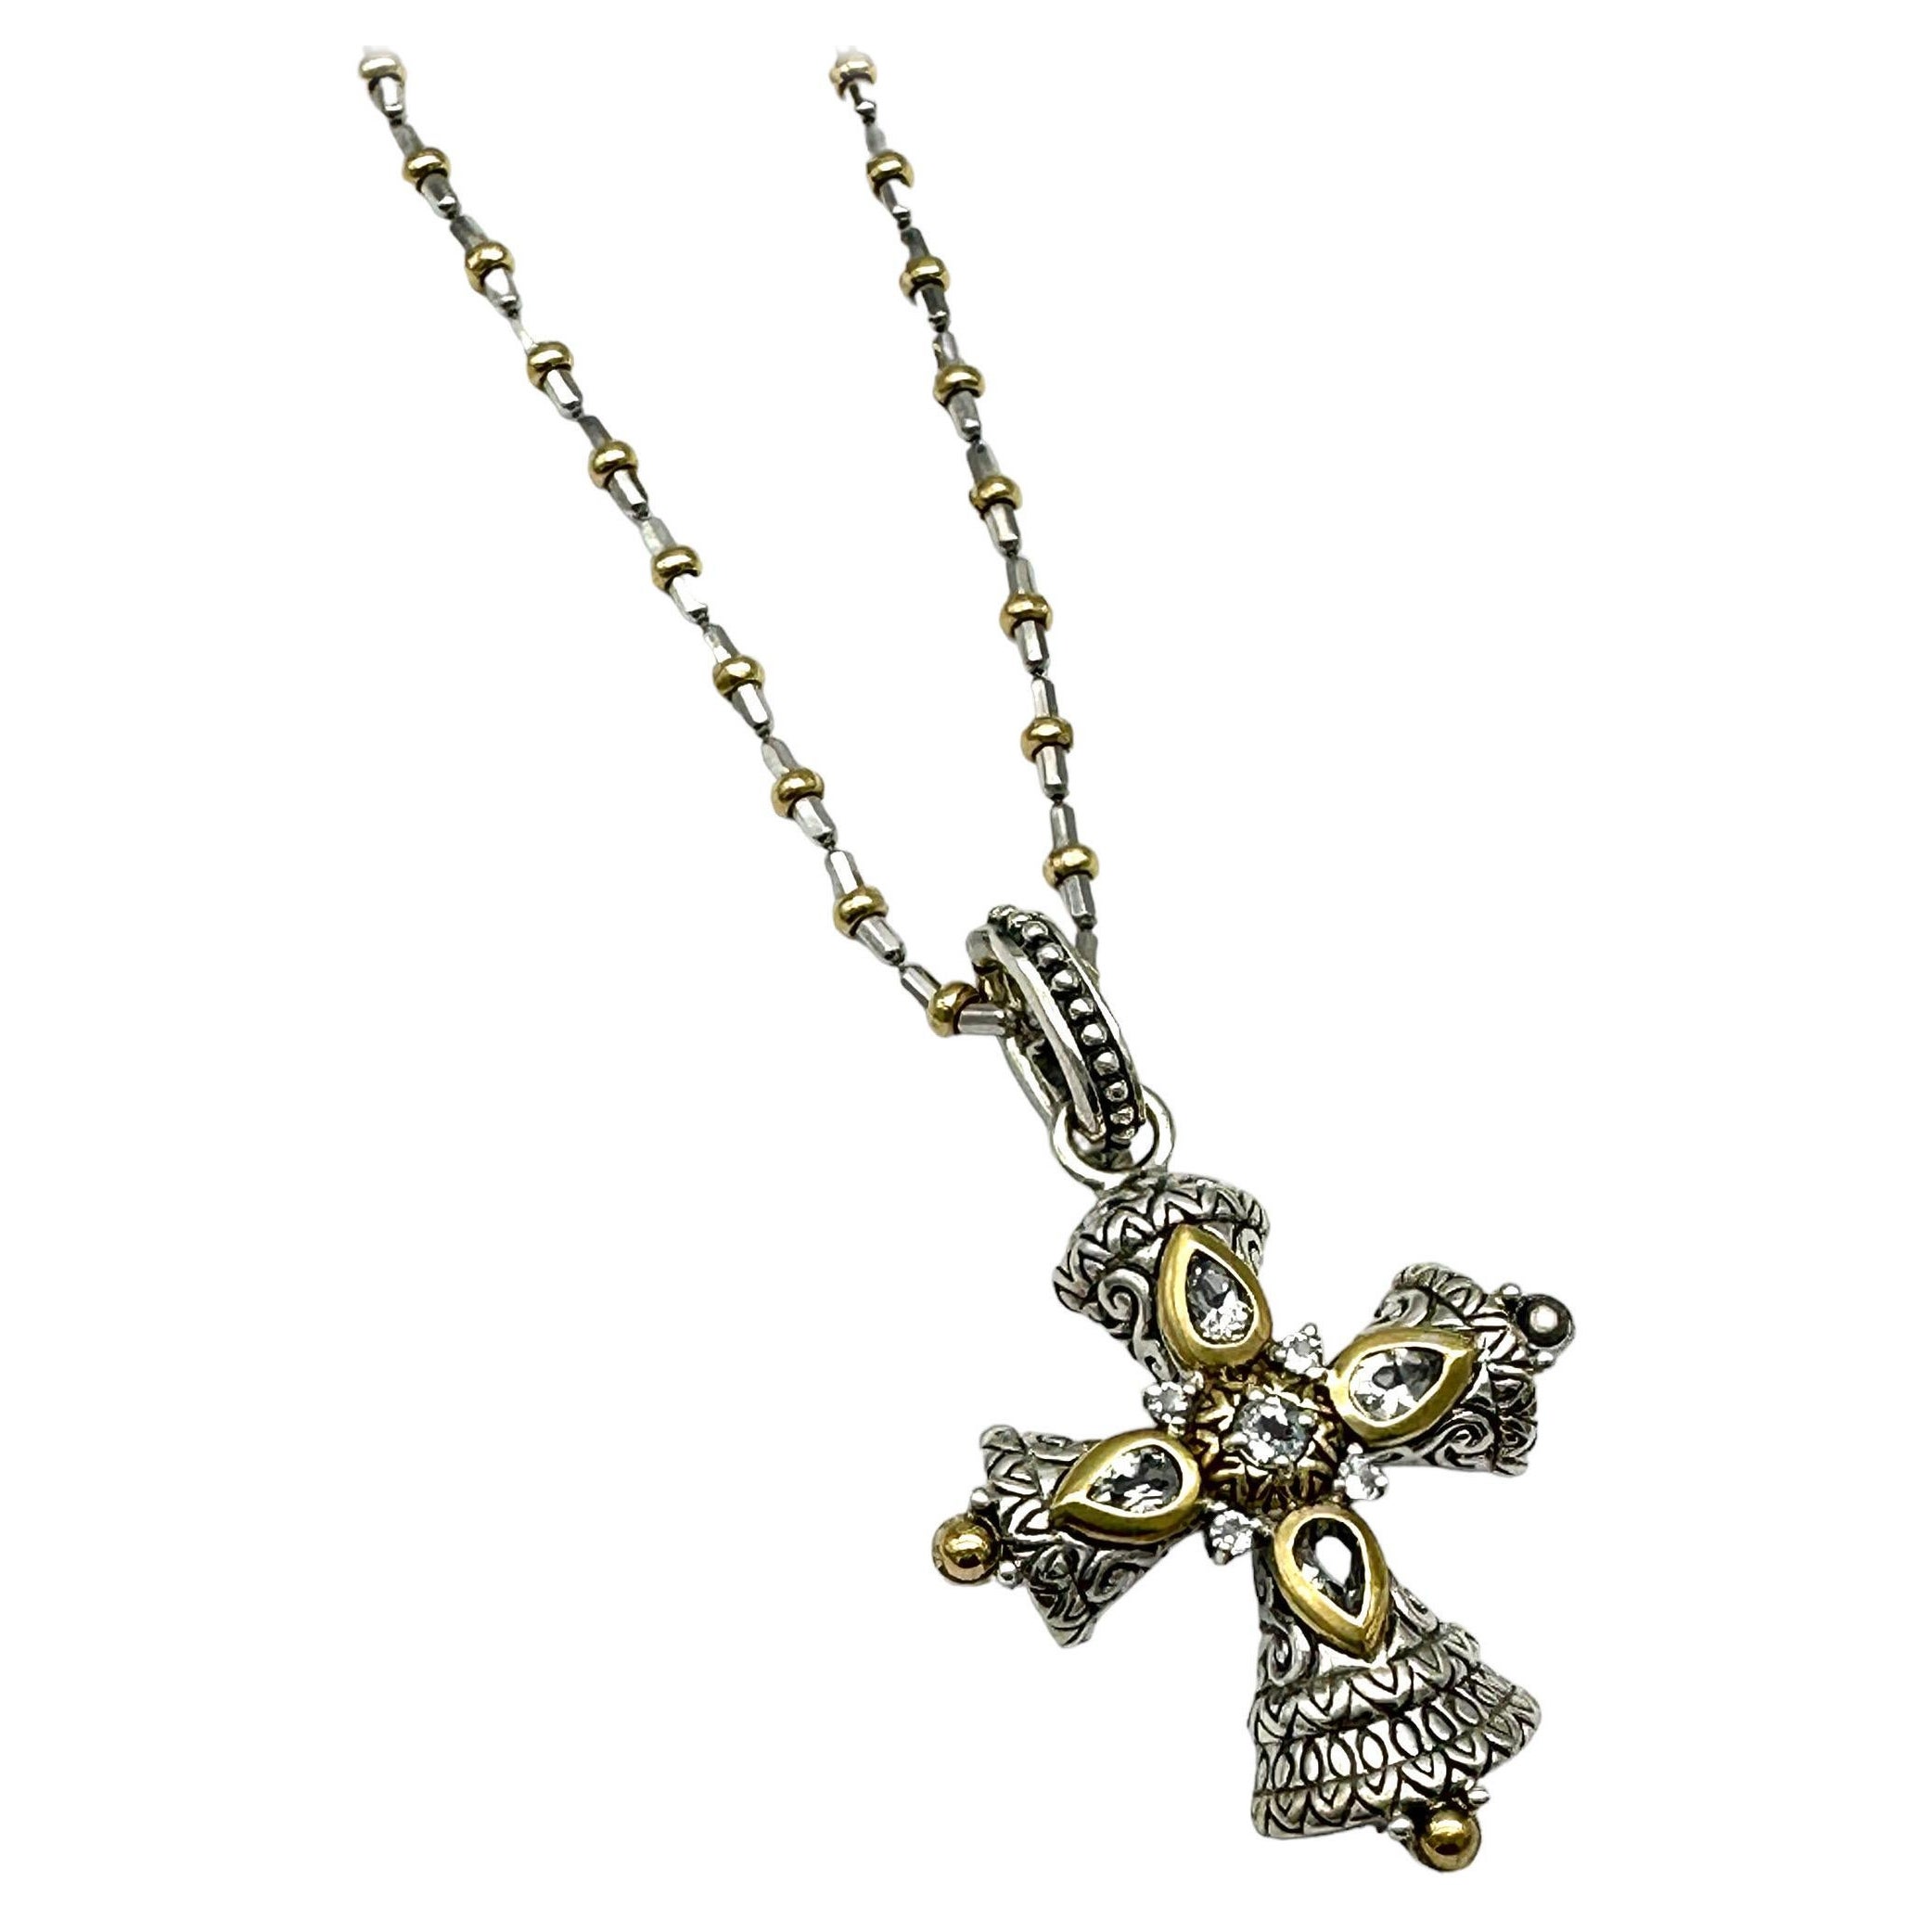 Byzantine Cross Two-Toned 1-3/4" With Chain Enhancer  For Sale